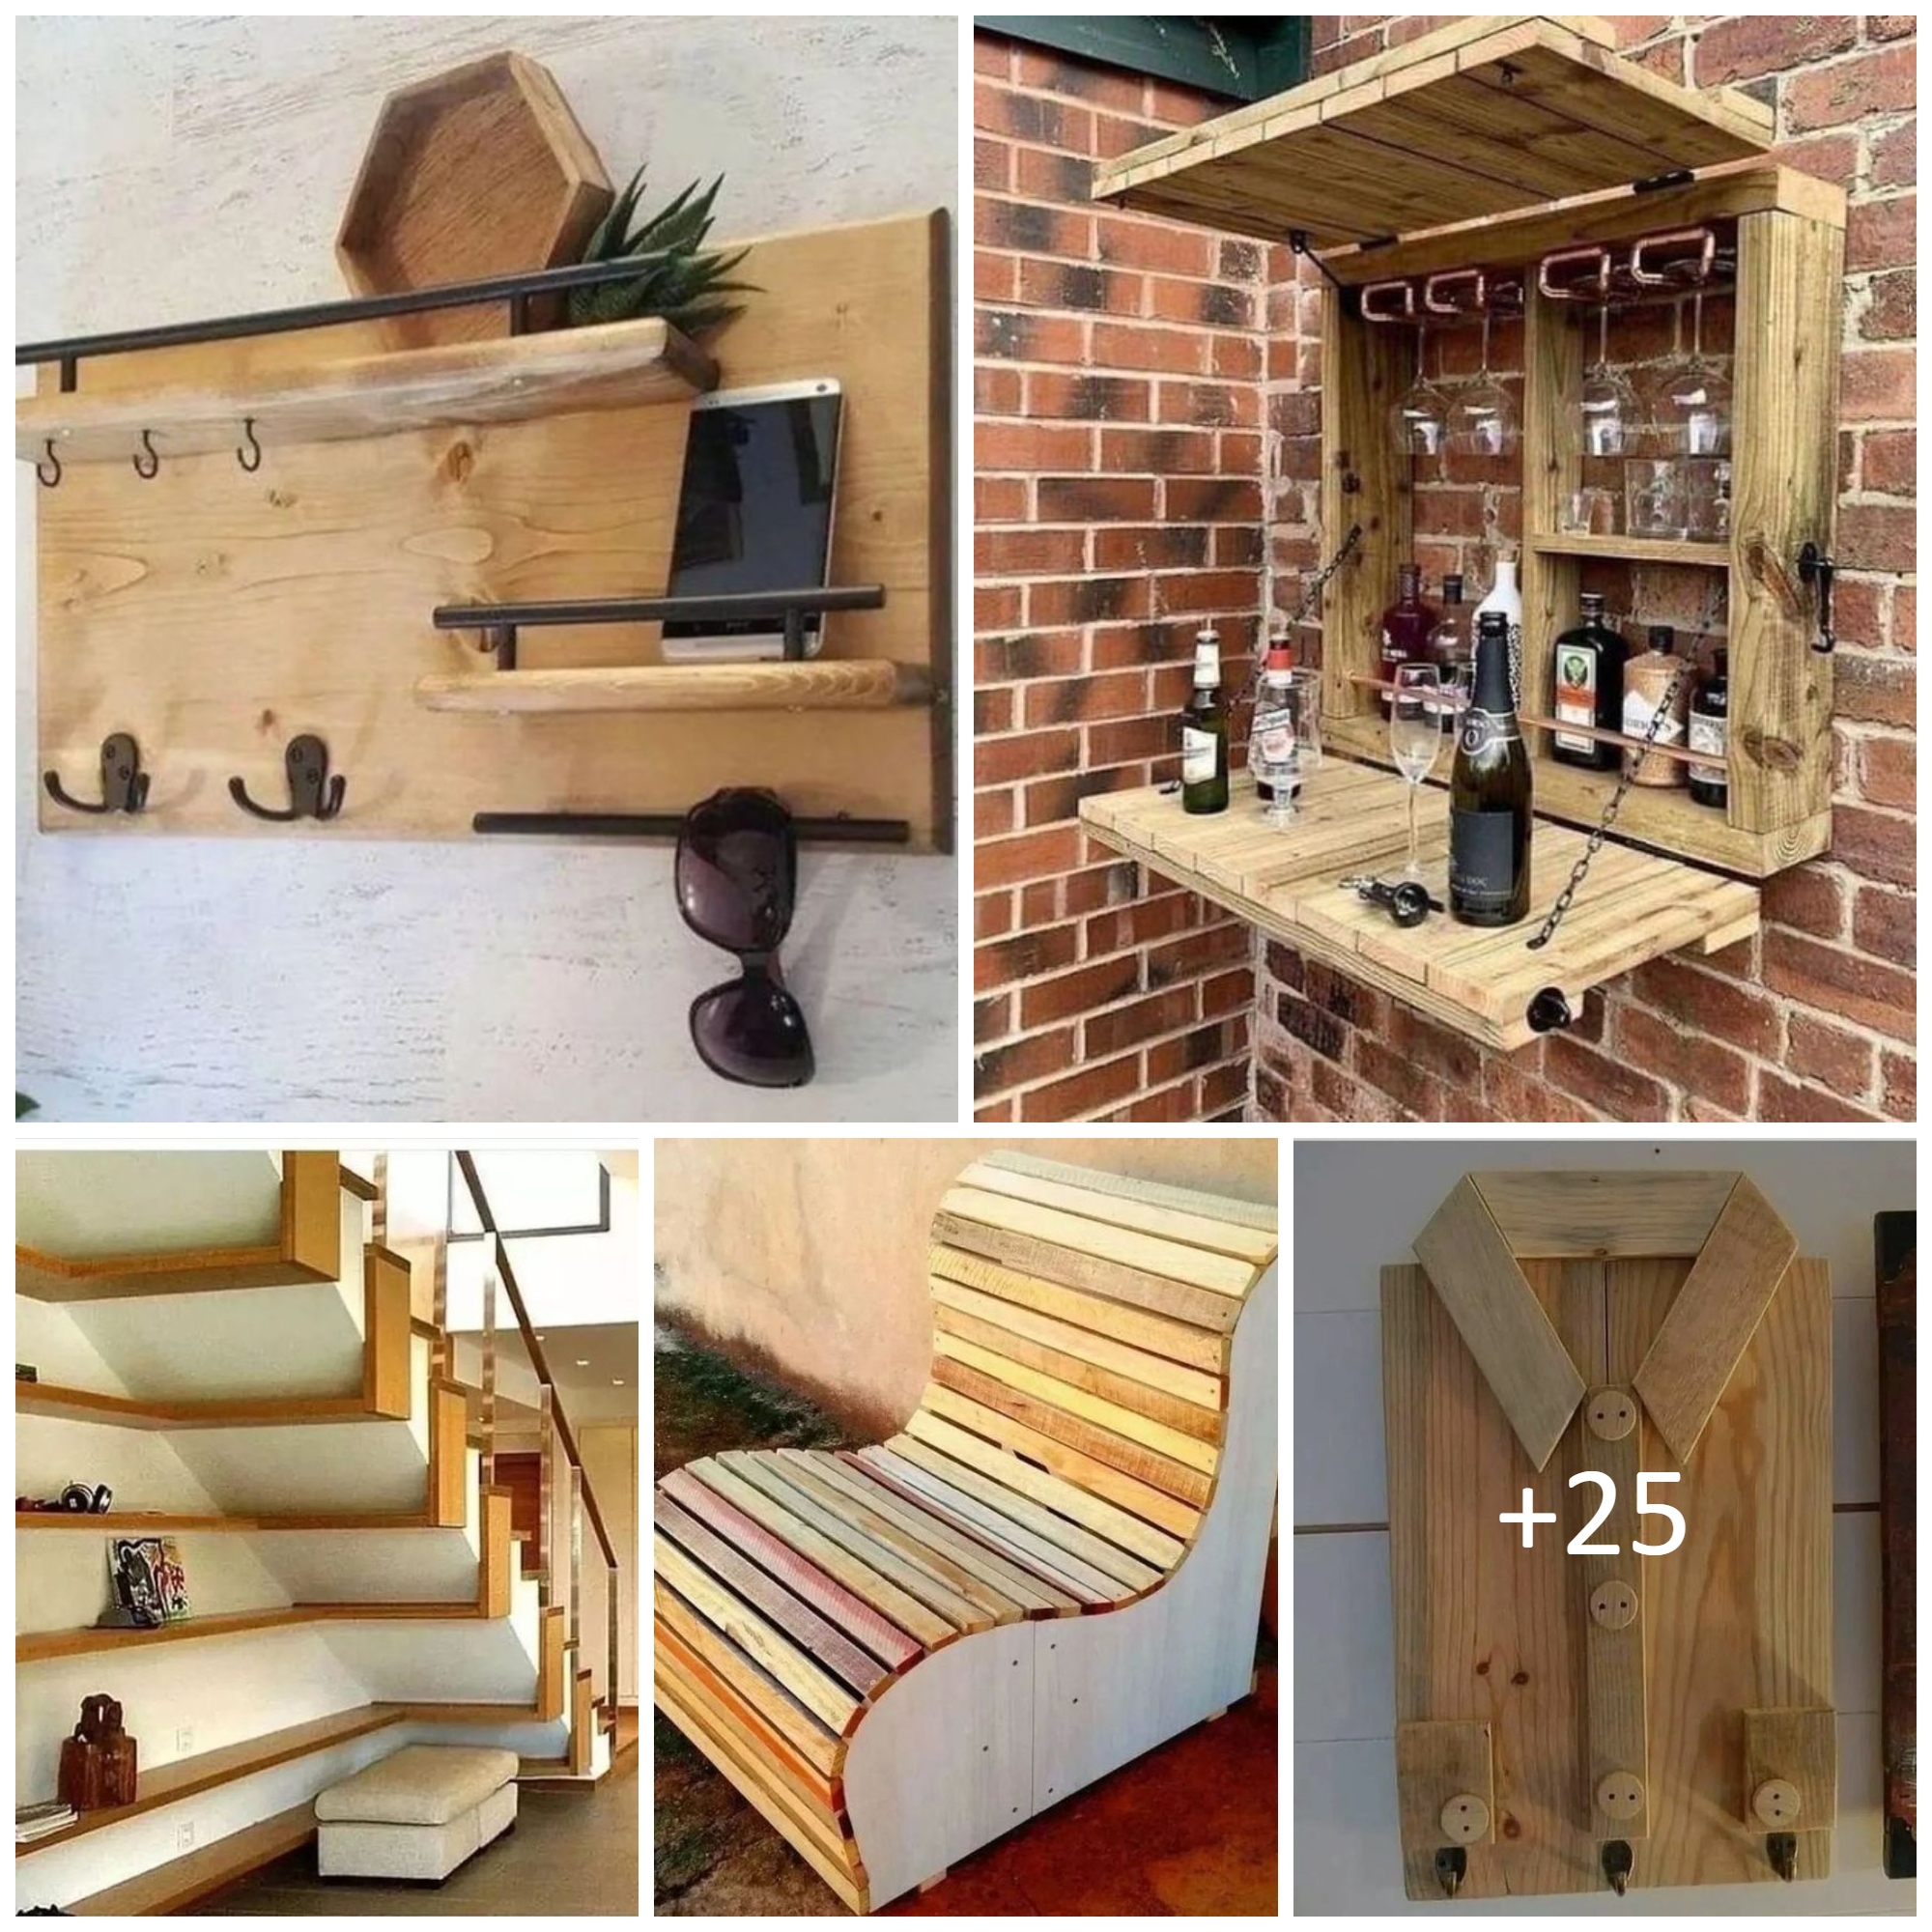 Awesome woodworking useful ideas and inspirations